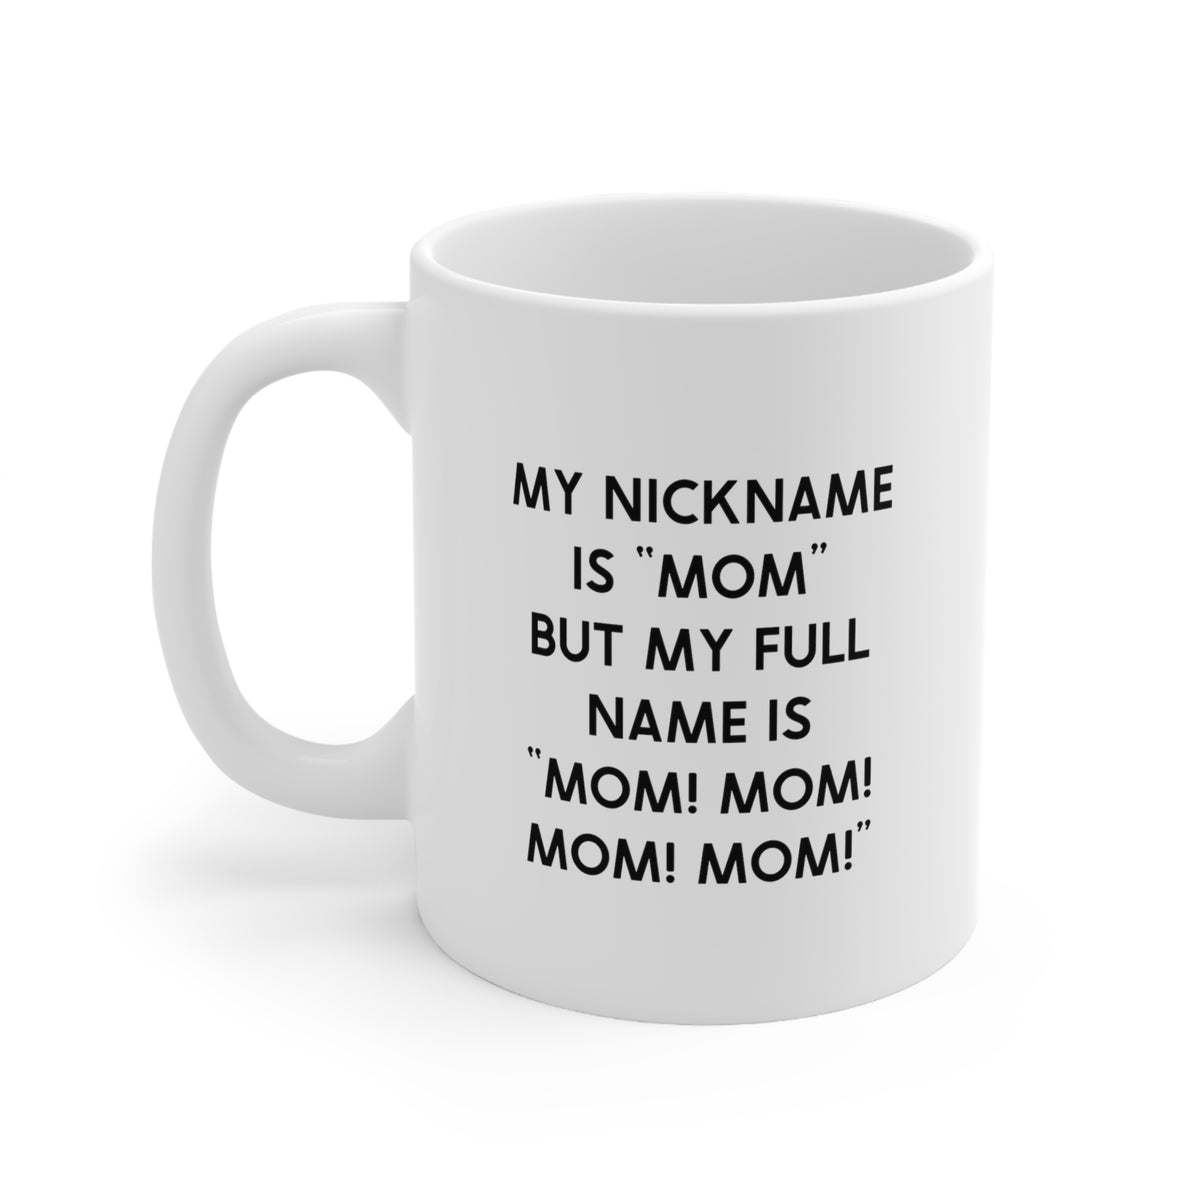 Mom Coffee Mug, My Nickname Is "Mom" But My Full Name Is "Mom! Mom! Mom! Mom!", Funny Mothers Day For Mommy From Son Daughter Visit the Proud Gifts Store